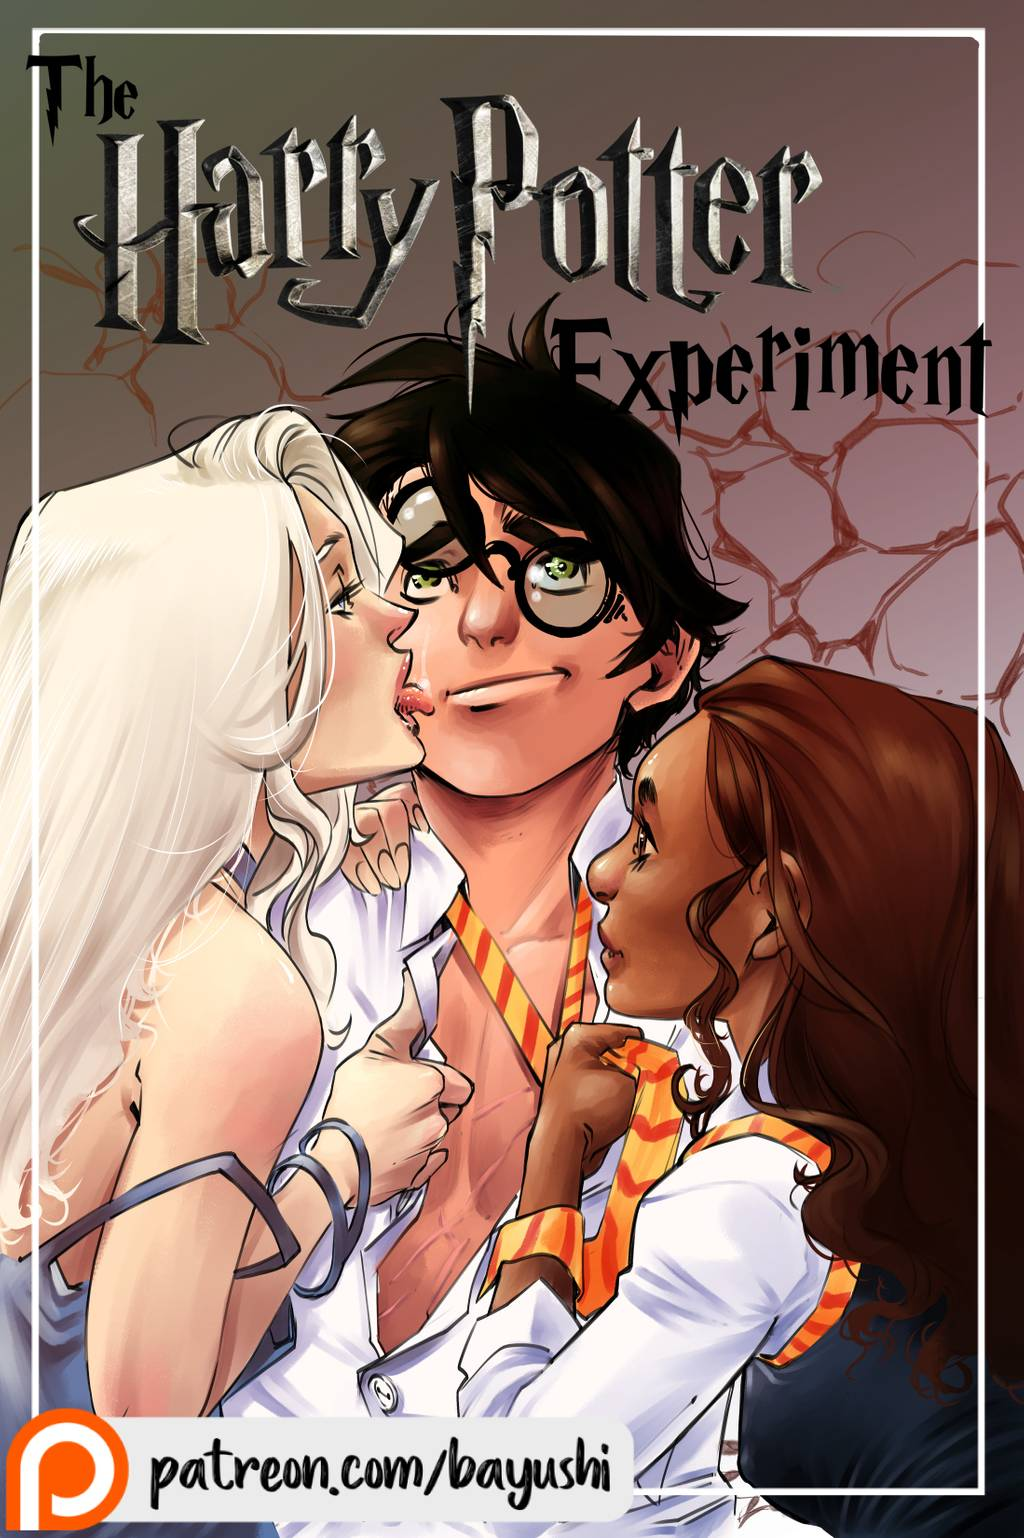 The Harry Potter Experiment from Bayushi - Harry potter porn parody - 8 pages - Ongoing